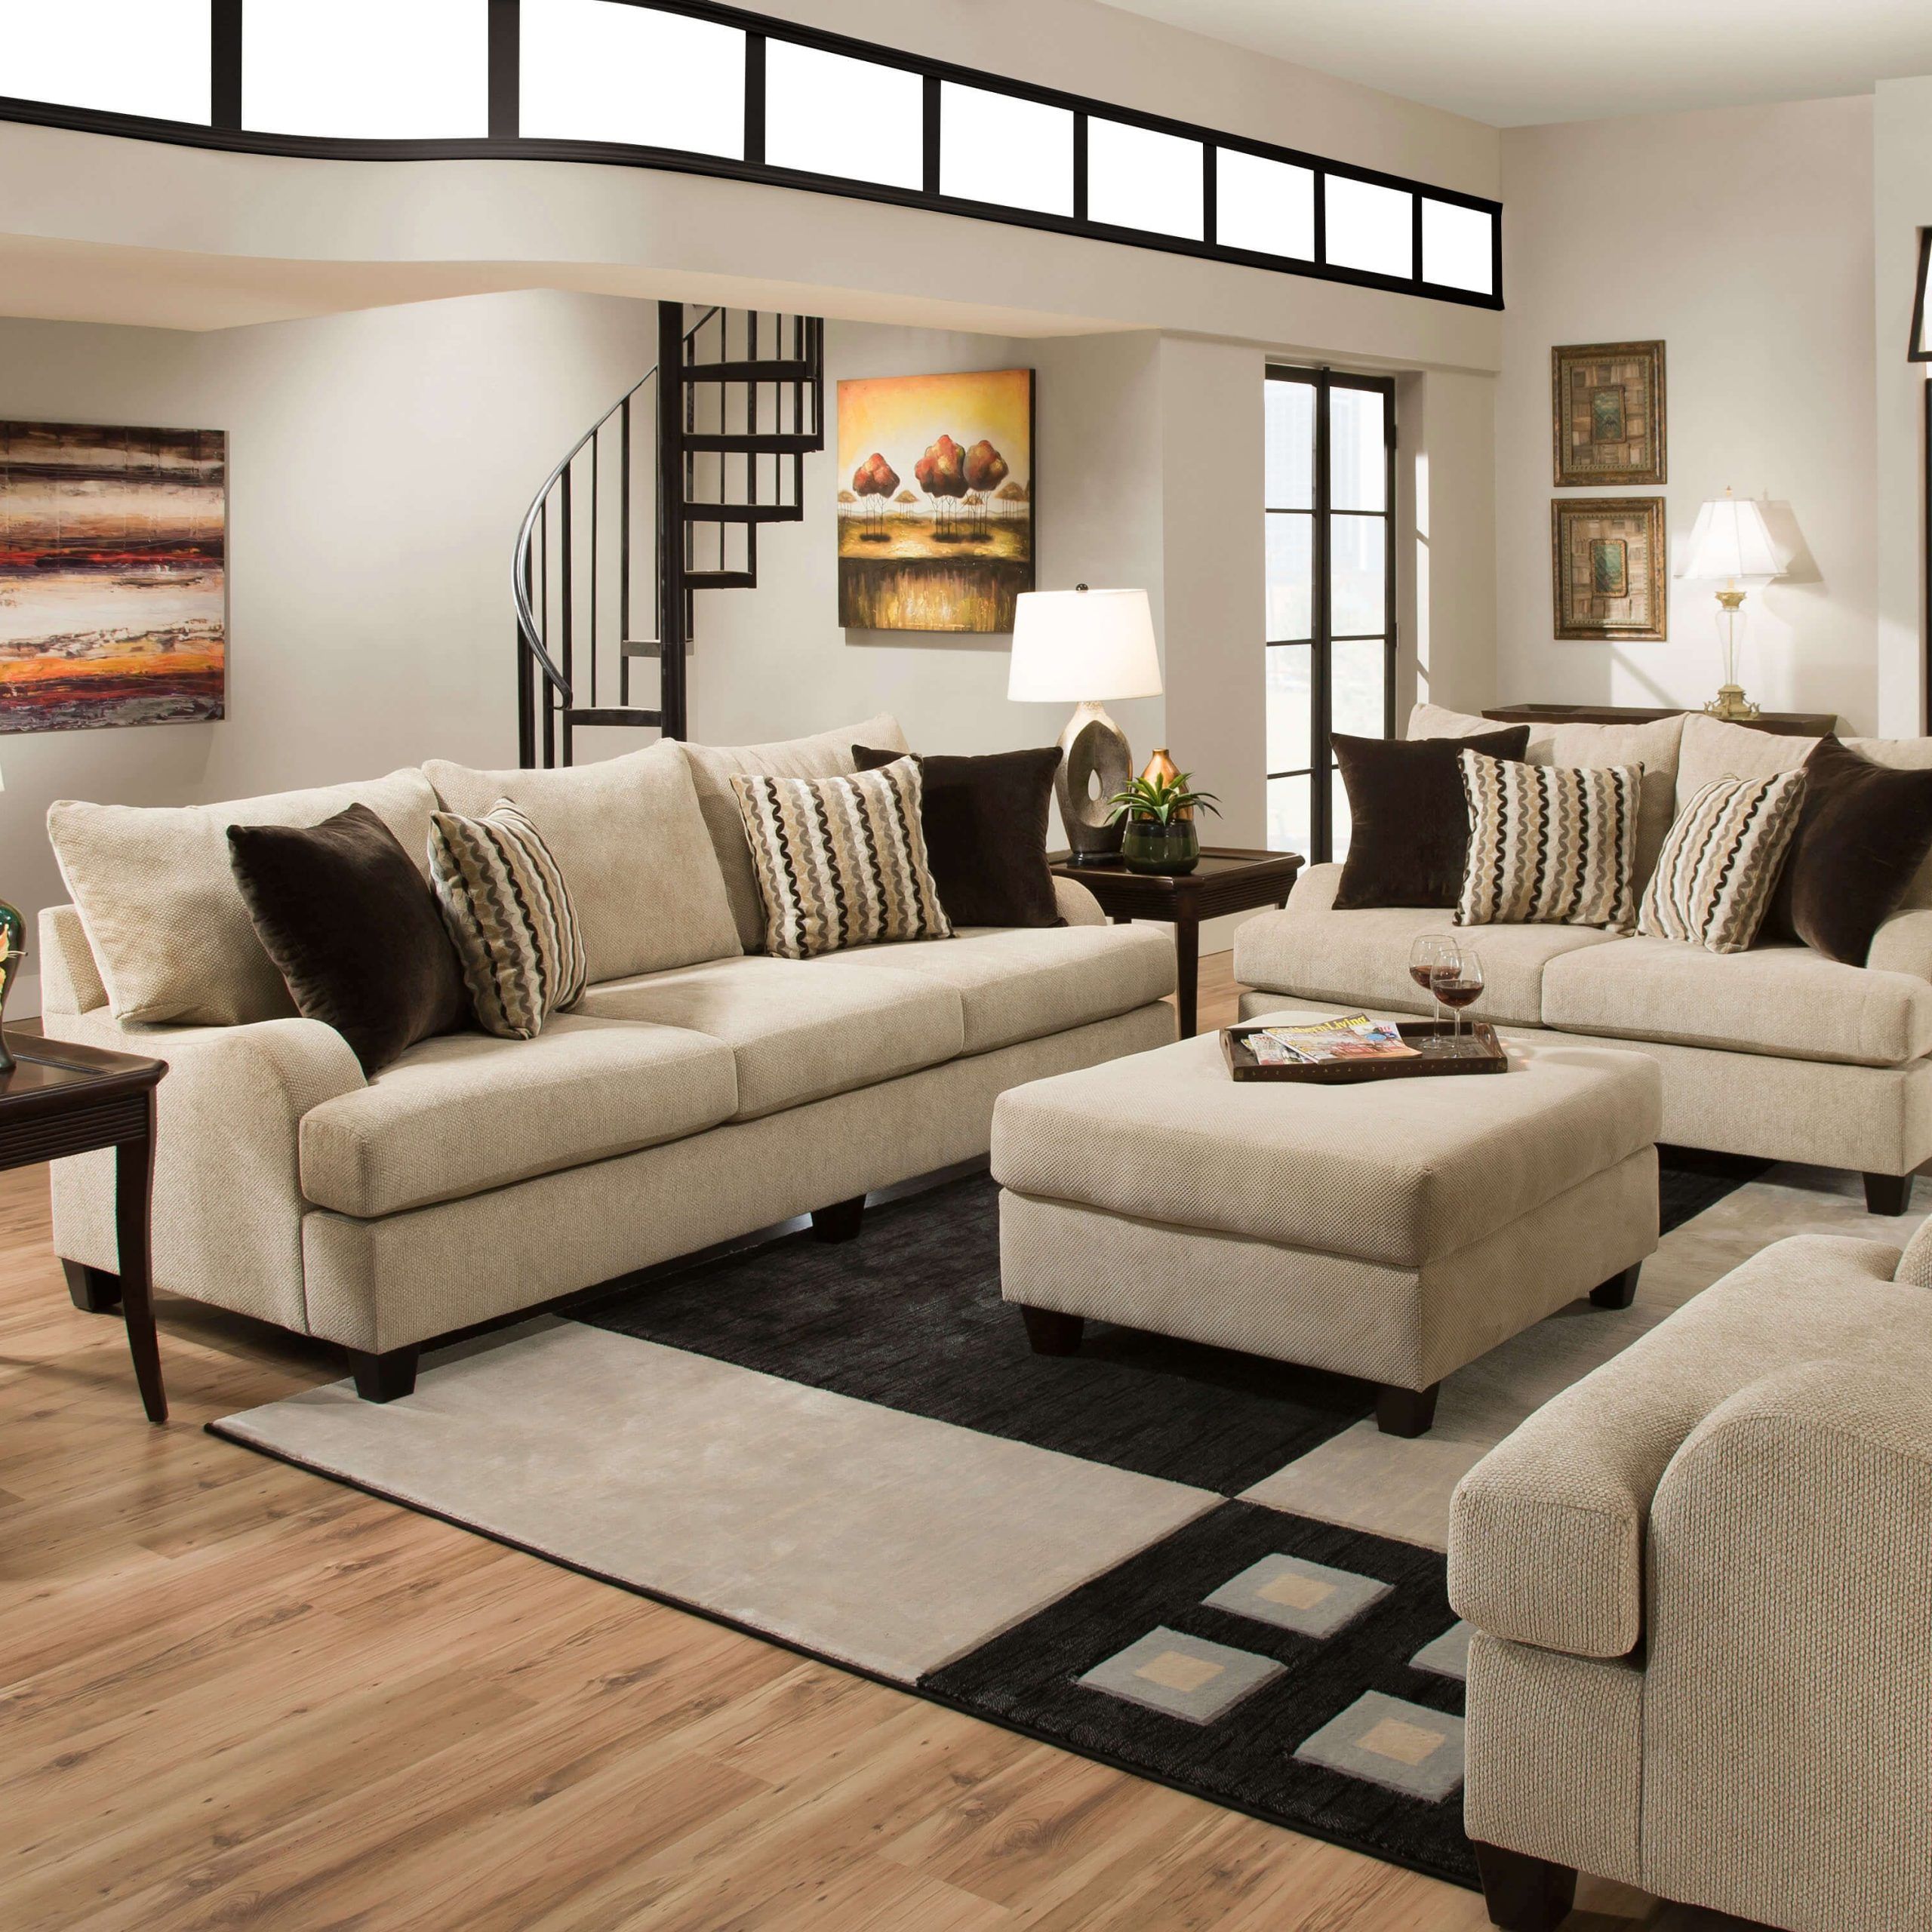 Simmons Trinidad Taupe Living Room Set | Wohnzimmer Gestalten, Sofa Throughout Sofas For Living Rooms (View 15 of 20)